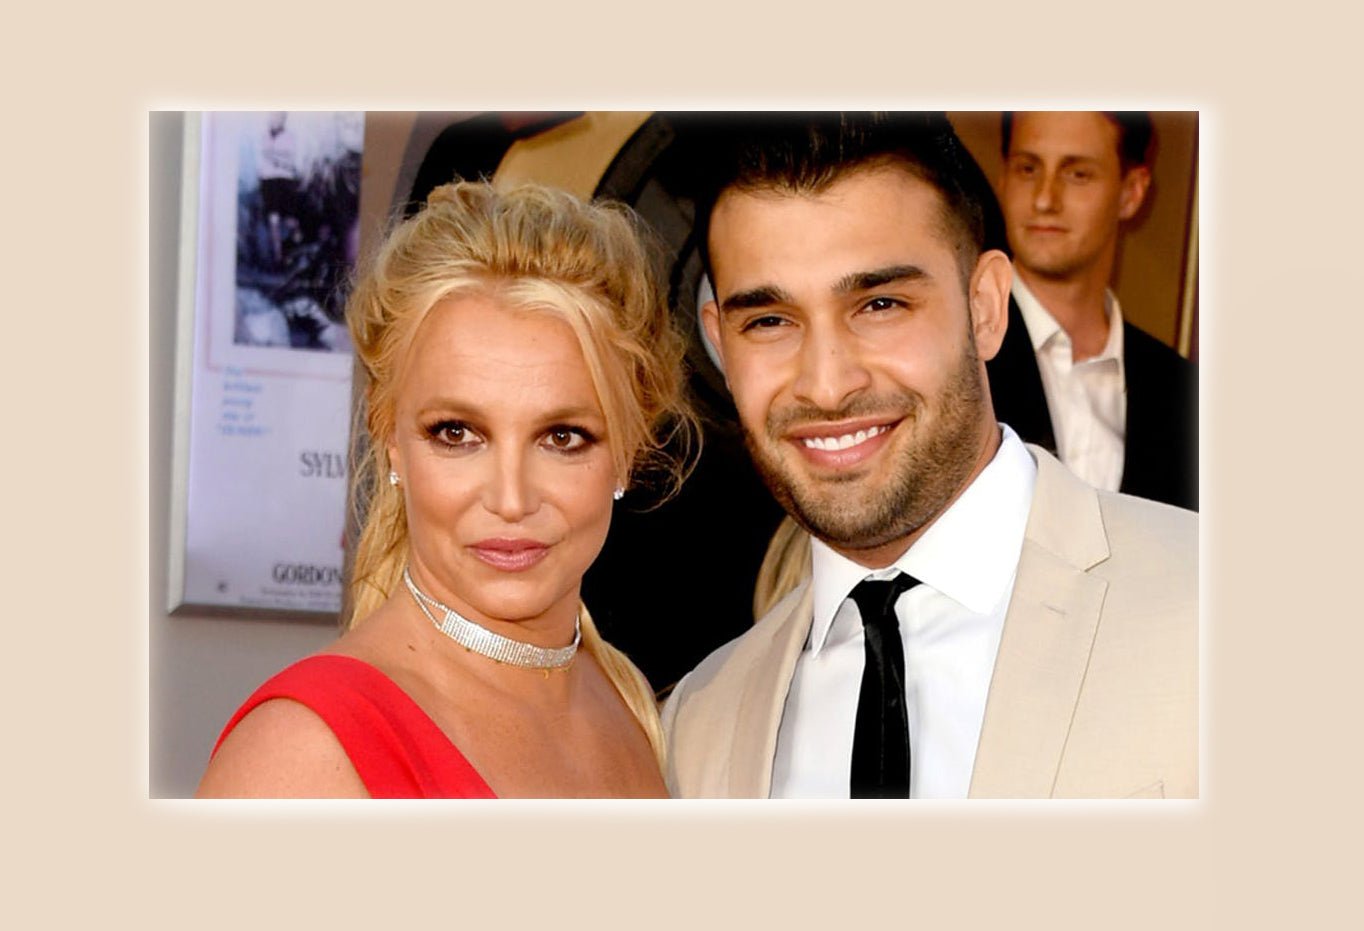 Britney Spears Got Engaged. The Post with Her Fabulous Engagement Ring Went Viral on Instagram - DSF Antique Jewelry